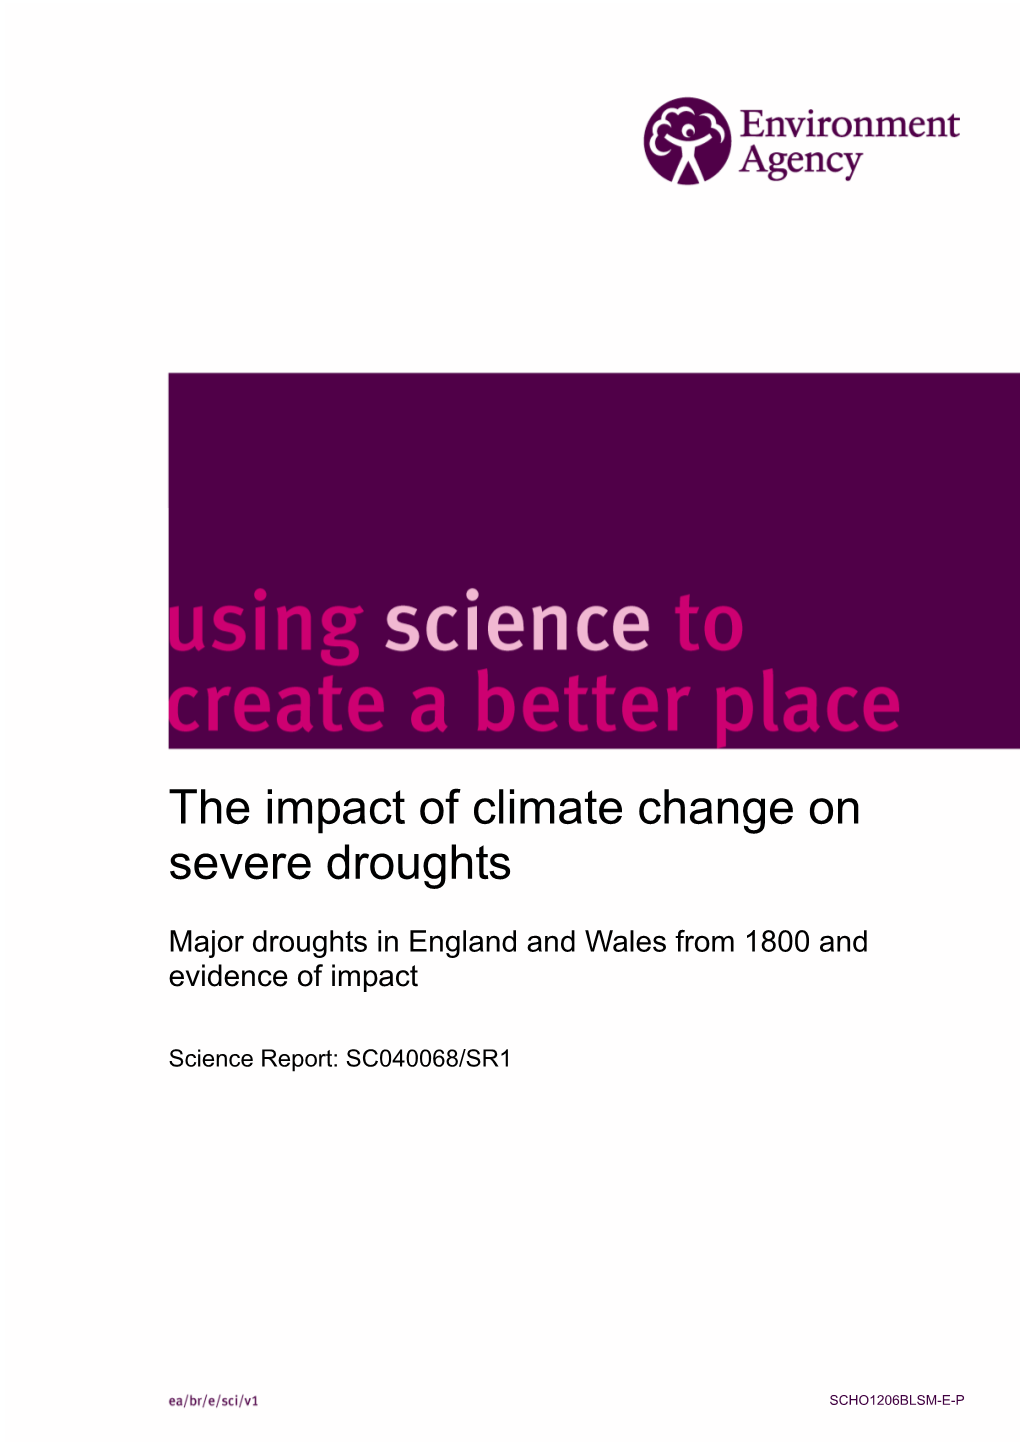 The Impact of Climate Change on Severe Droughts